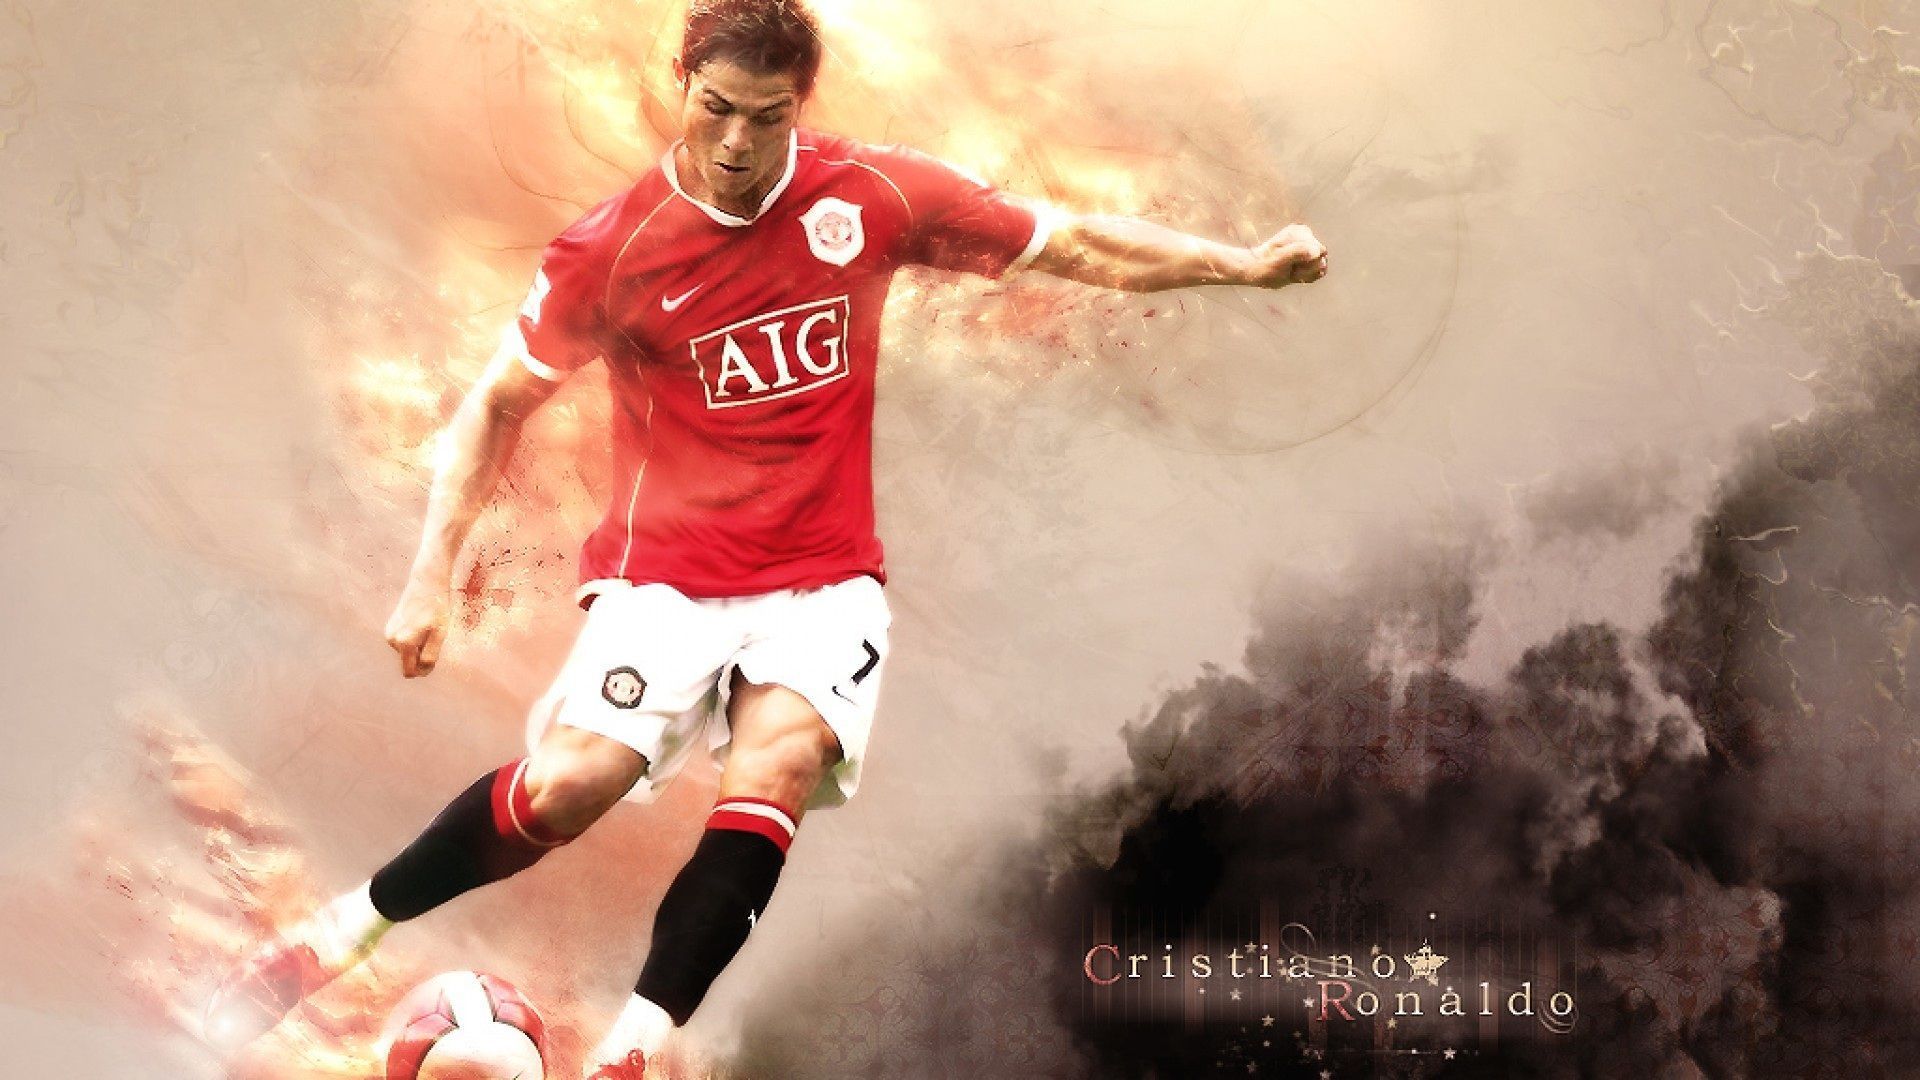 Cristiano Ronaldo Soccer Player Wallpapers | The Art Mad Wallpapers